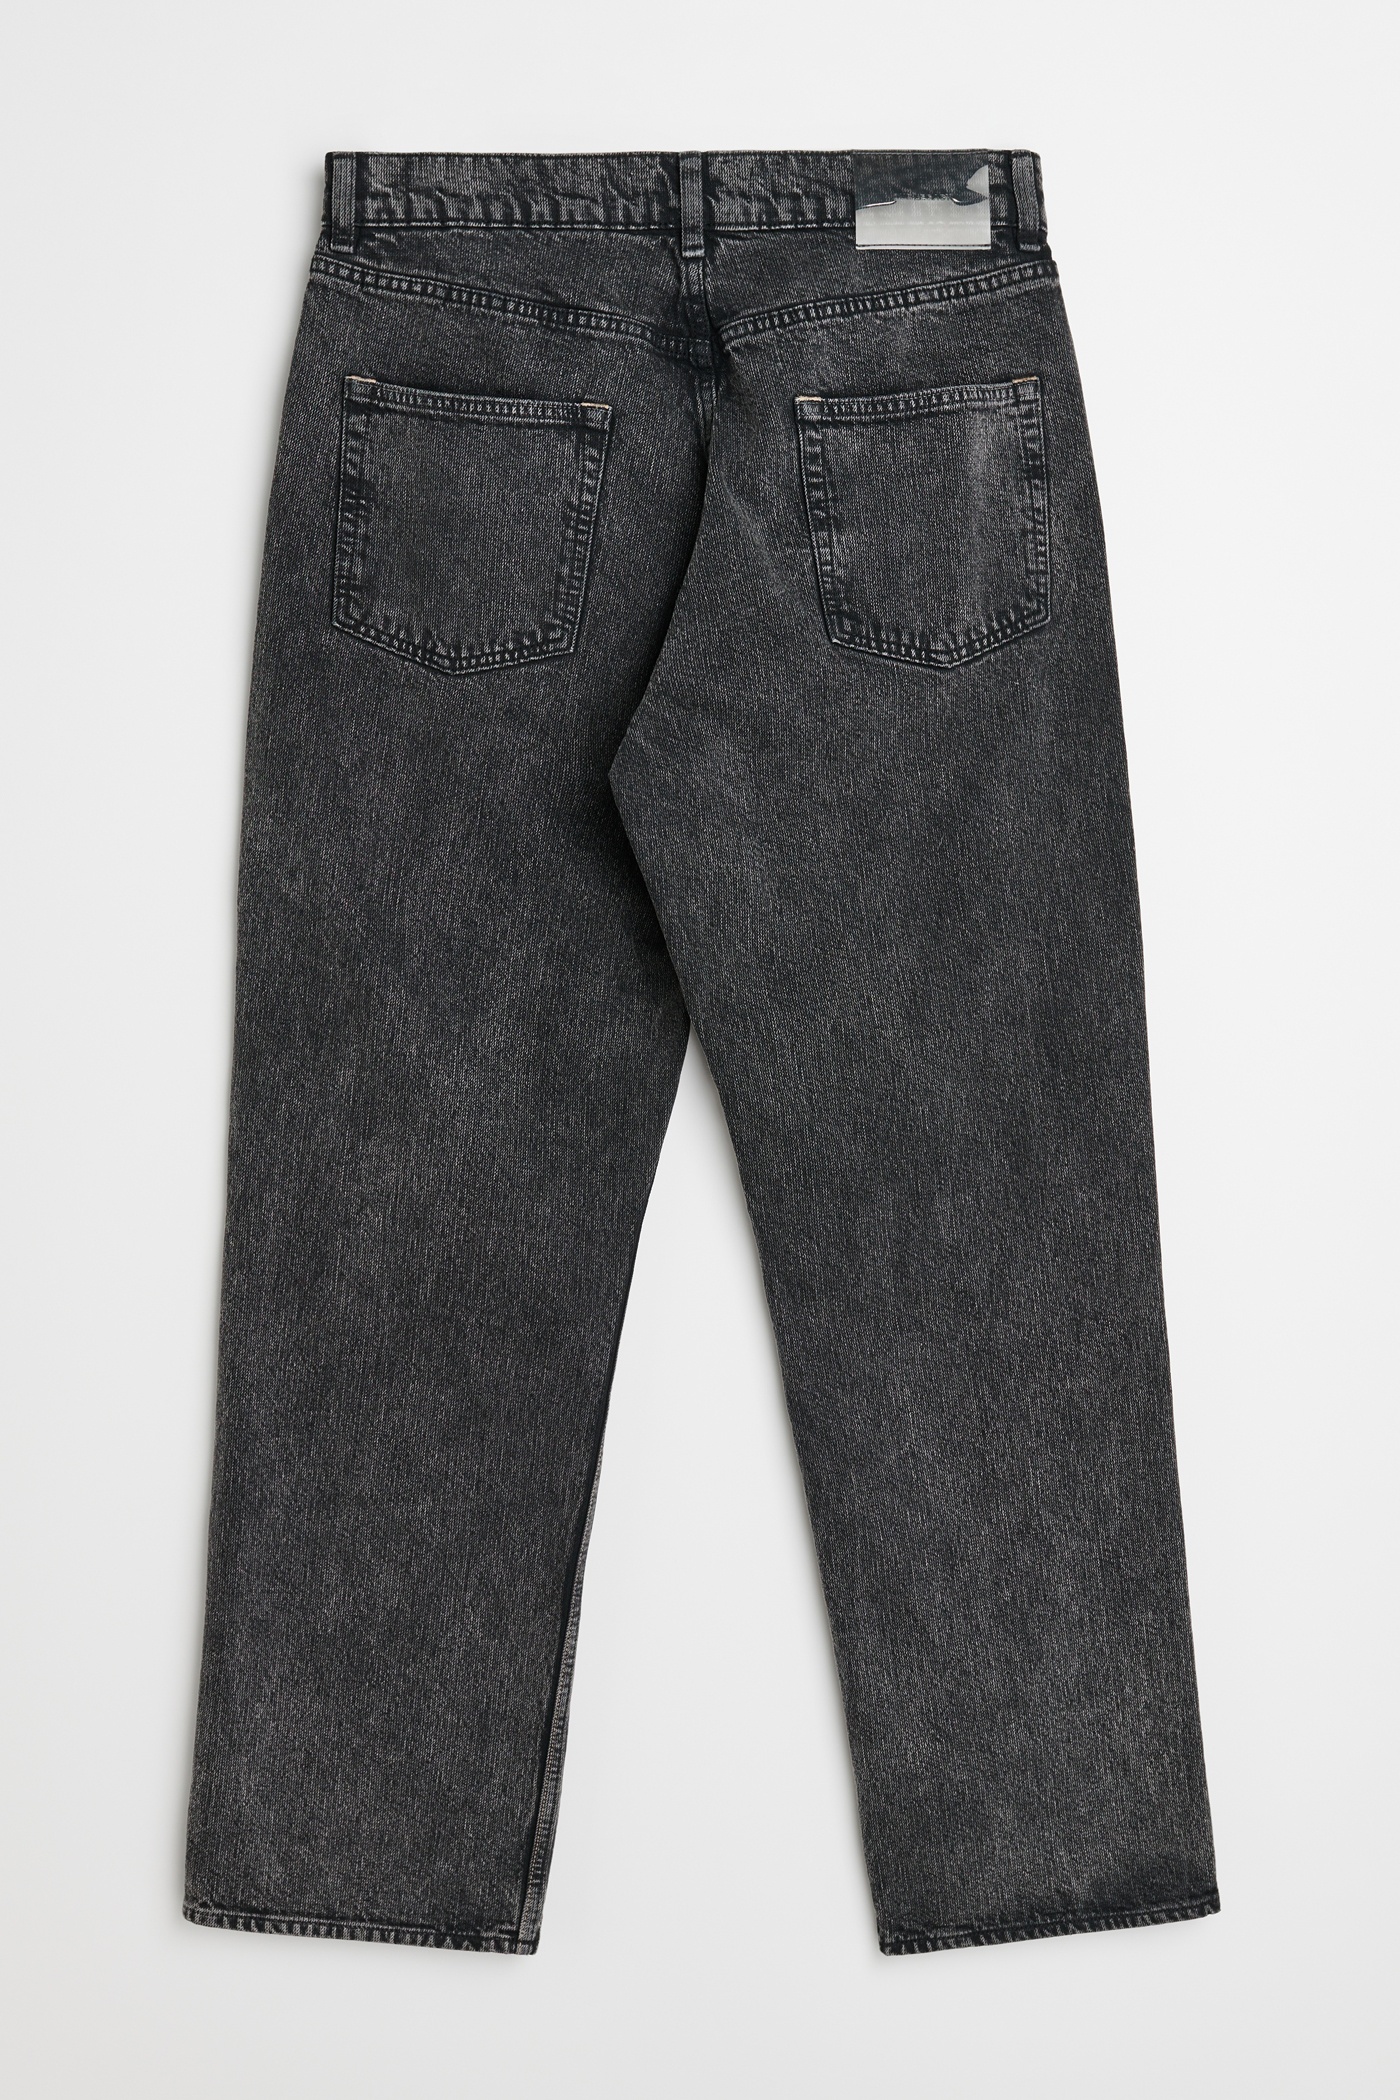 Formal Cut Overdyed Black Chain Twill - 9